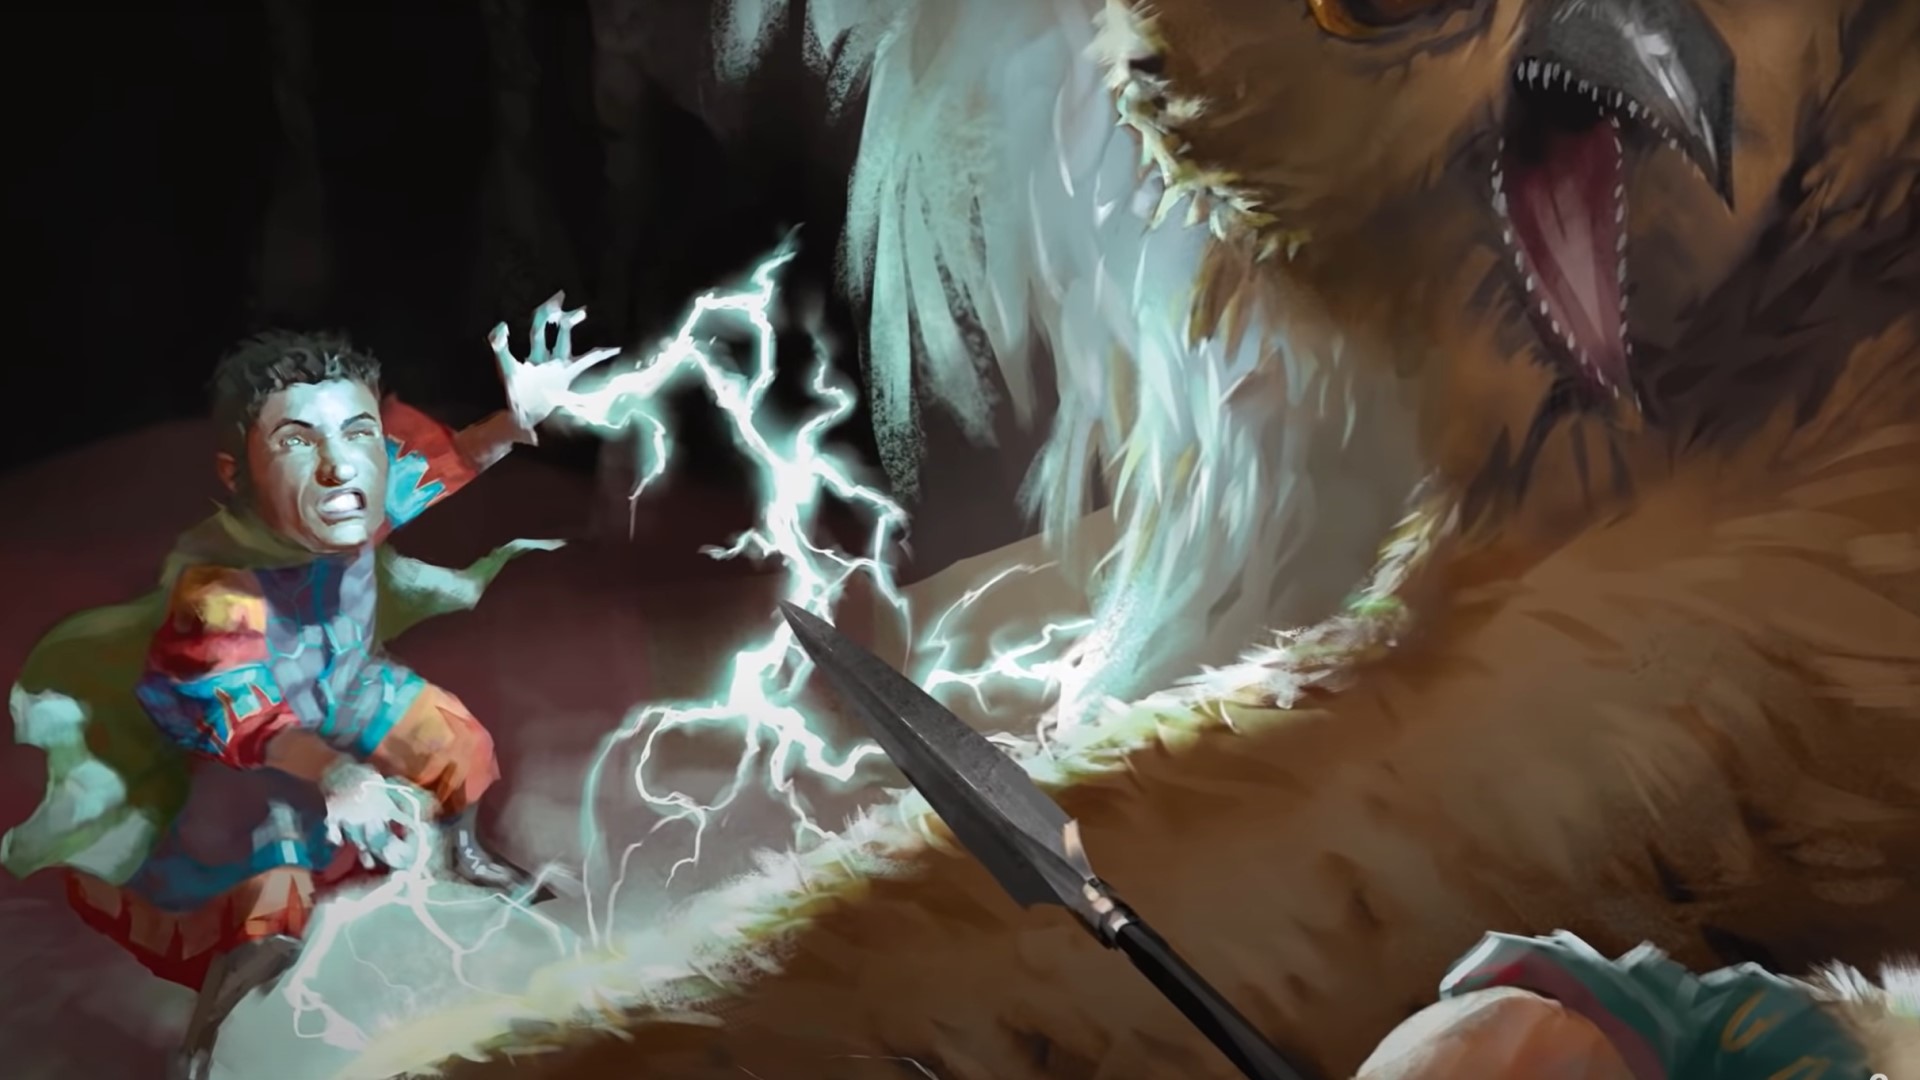 DnD Gnome 5e casting electric magic on a beast (art by Wizards of the Coast)